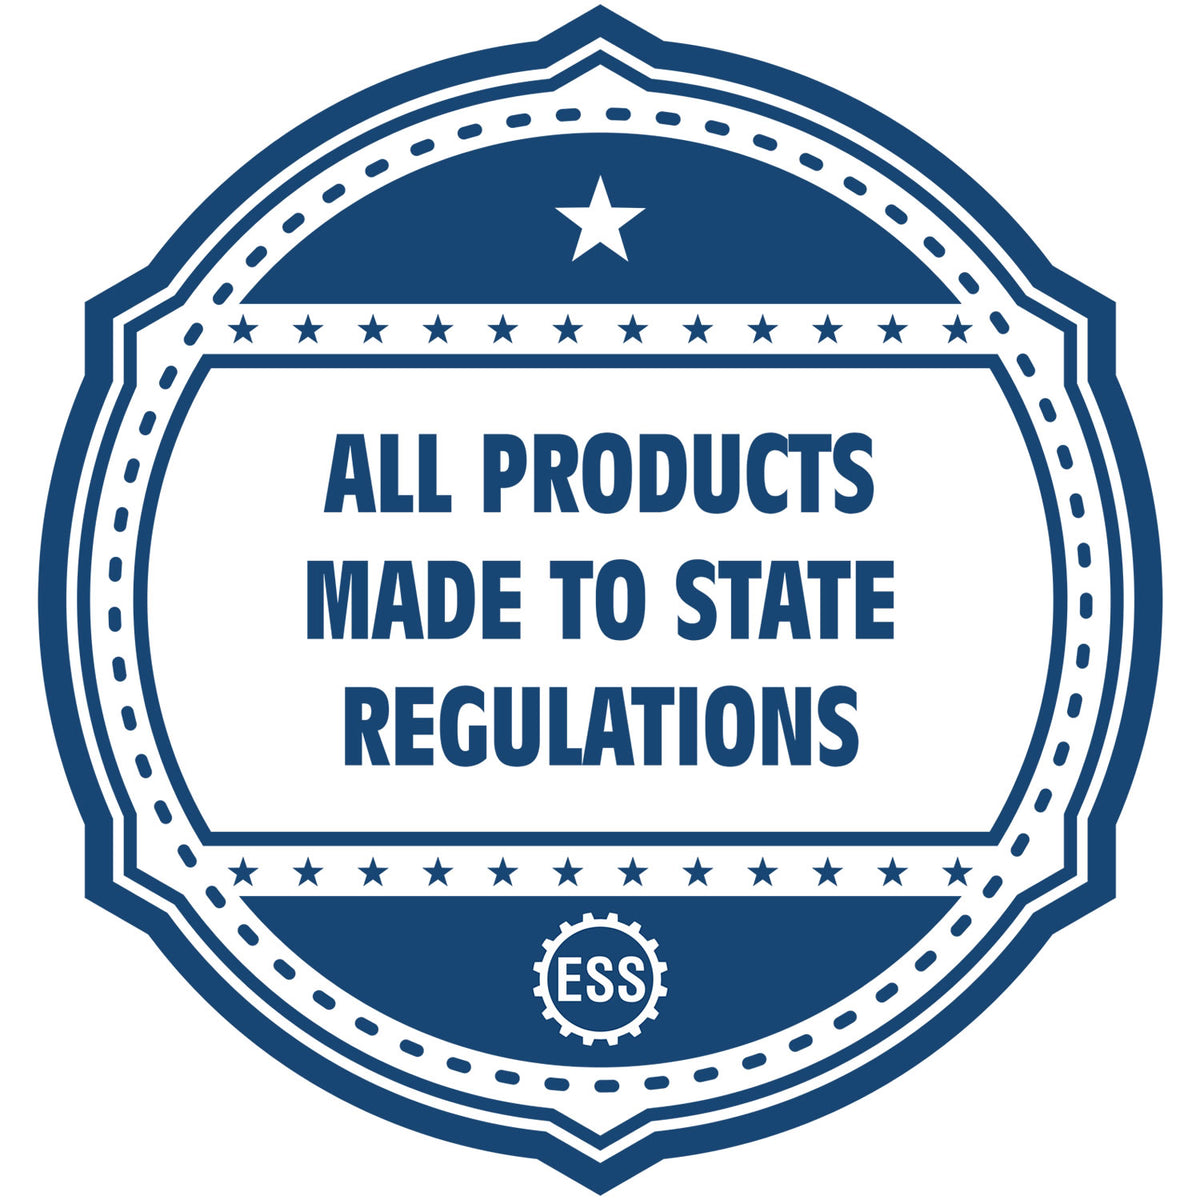 An icon or badge element for the Premium MaxLight Pre-Inked Texas Engineering Stamp showing that this product is made in compliance with state regulations.